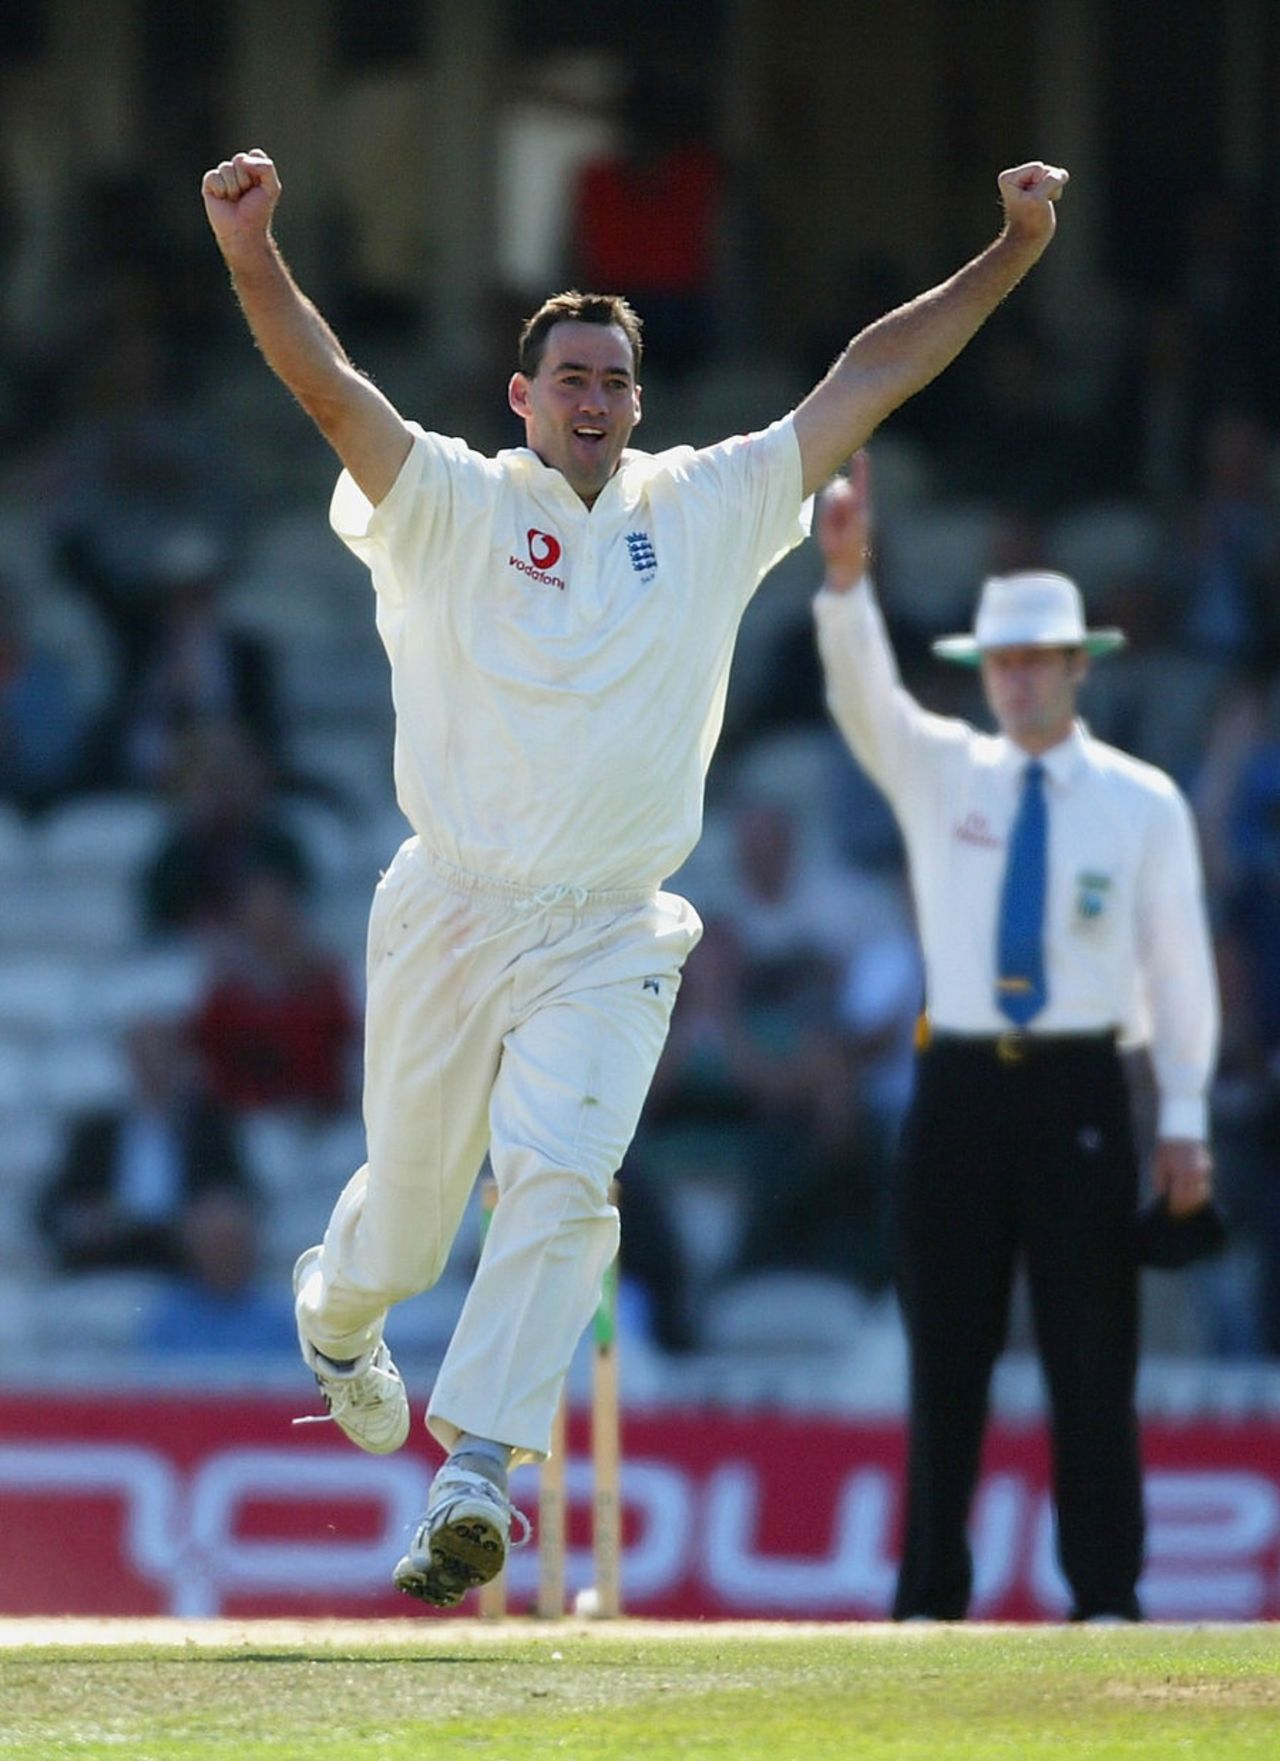 Martin Bicknell celebrates the wicket of Mark Boucher, England v South Africa, 5th Test, September 8, 2003